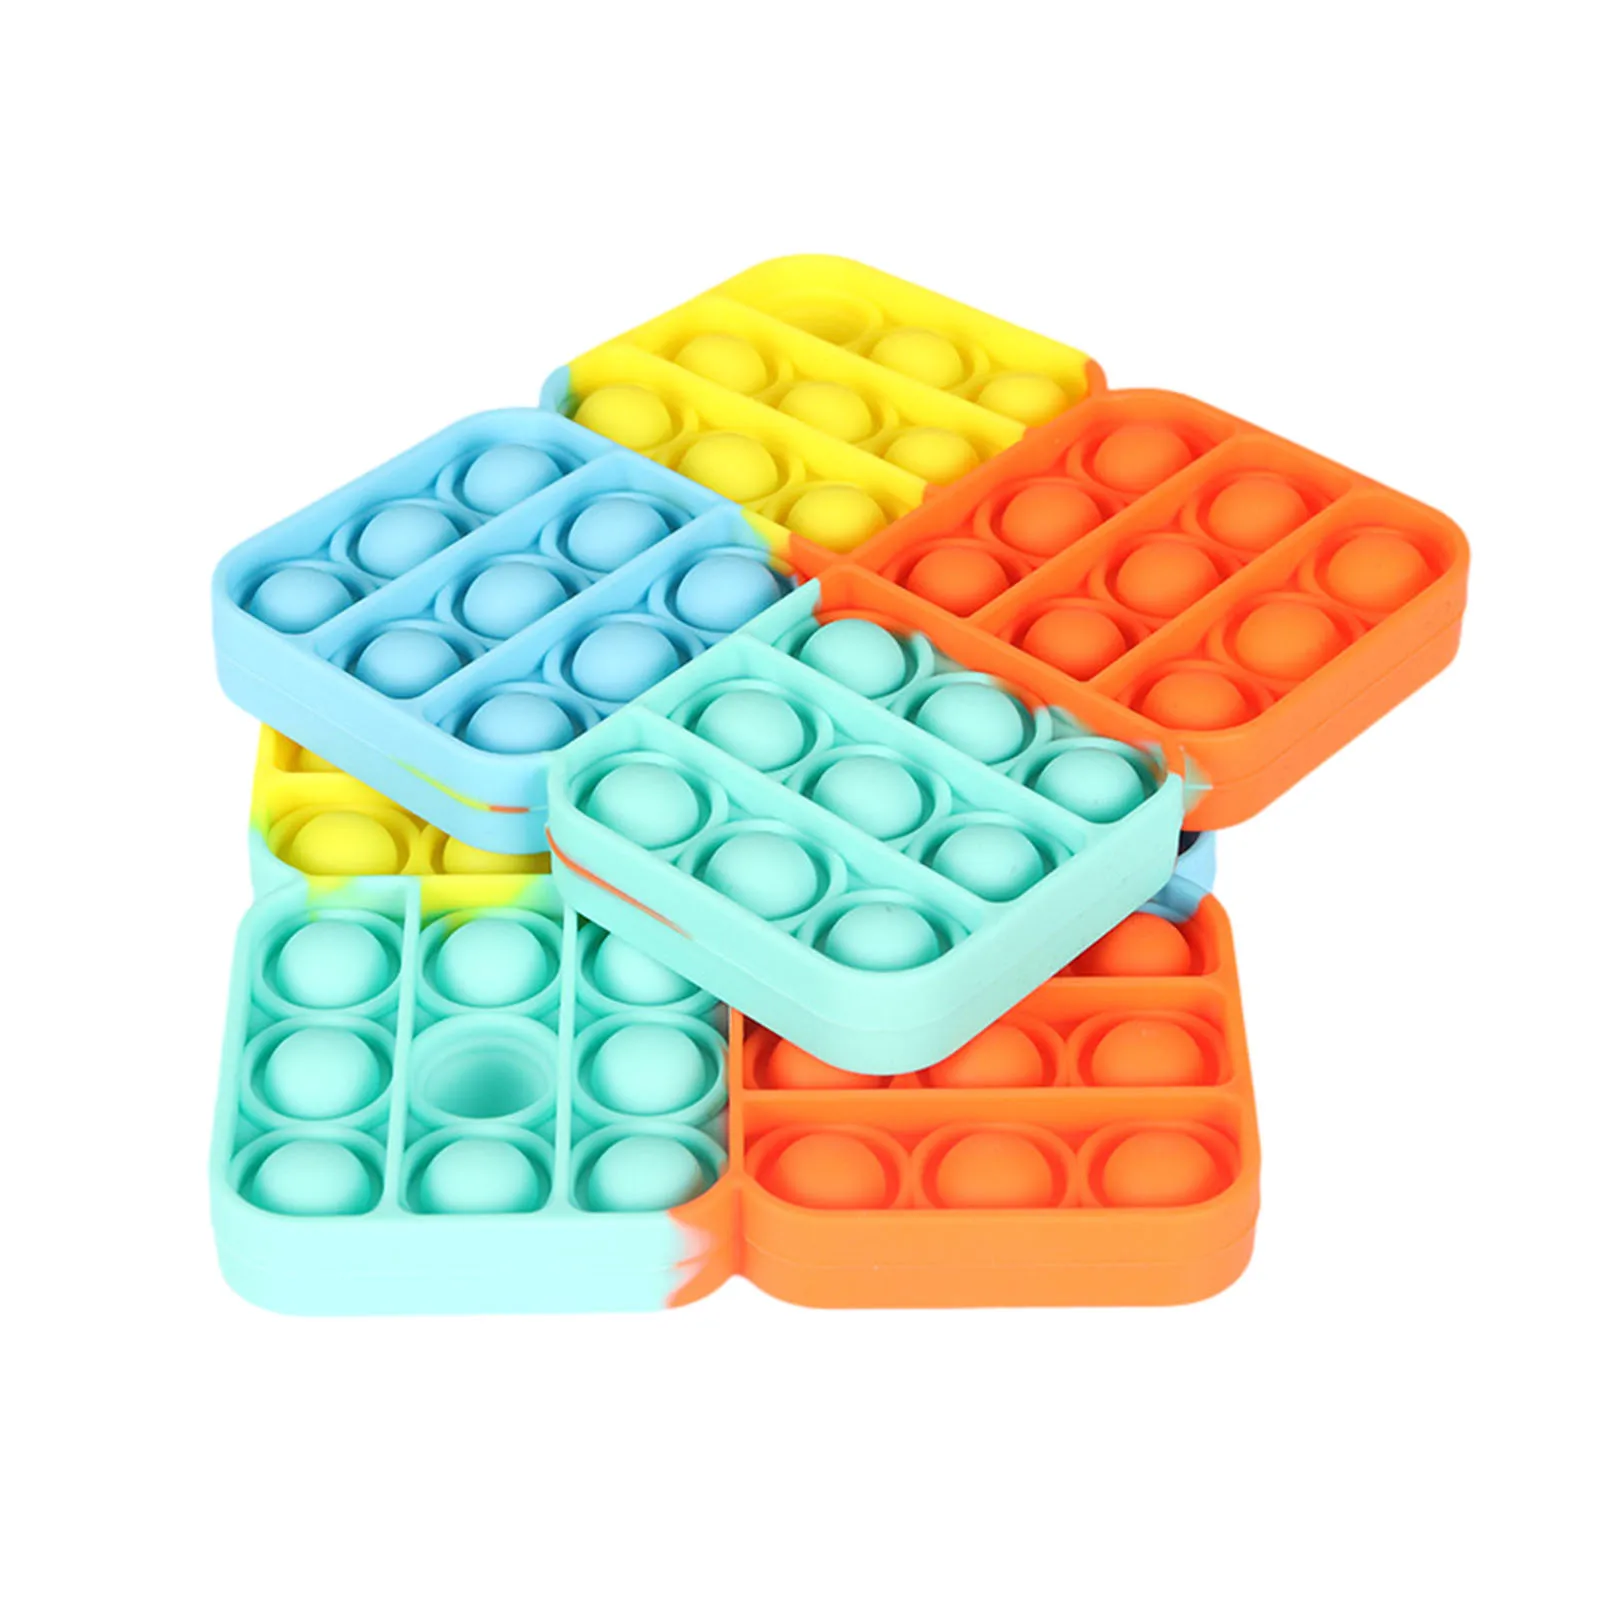 

Color Contrast Dimple Fidget Toy Extrusion Springback Squeeze Bubble Sensory Toy Stress Reliever Hand Toy Gift For Kids